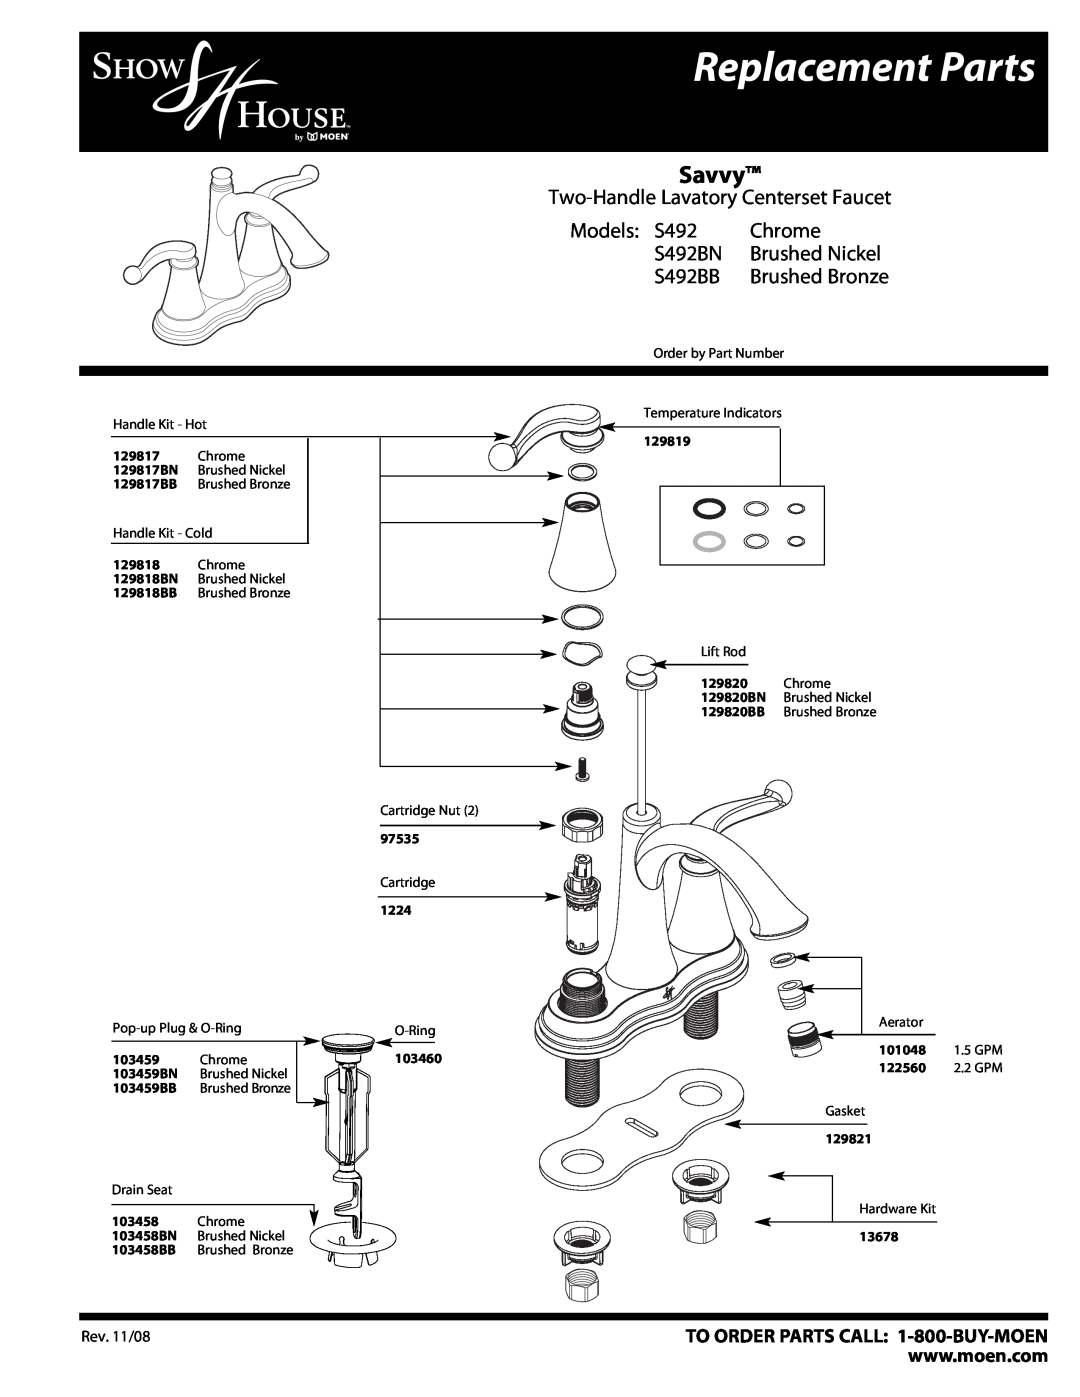 Moen S492BB manual Replacement Parts, Savvy, Two-Handle Lavatory Centerset Faucet, Models S492, Chrome, S492BN, Rev. 11/08 